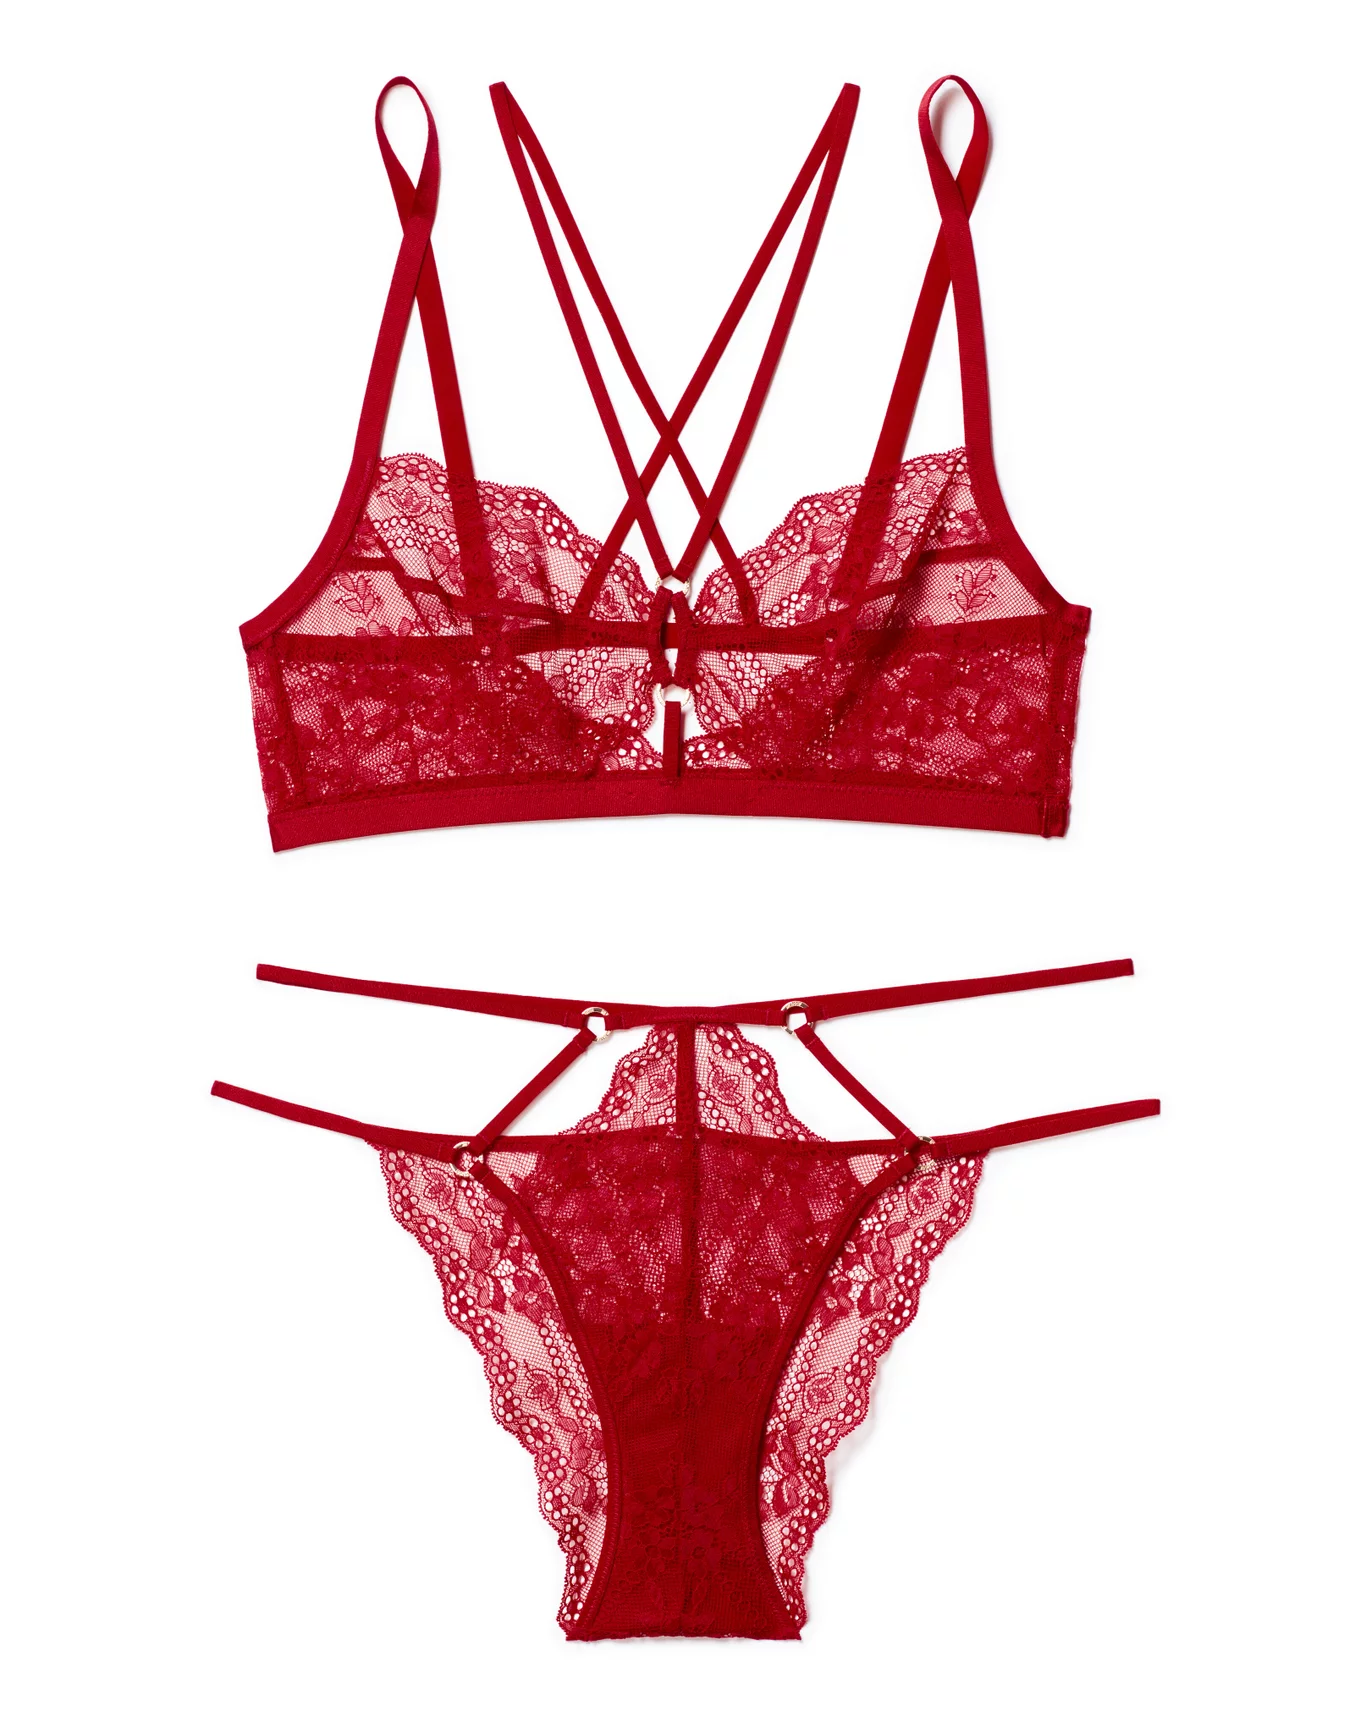 Up To 48% Off on 5 Pack Women Sexy Lace Underw